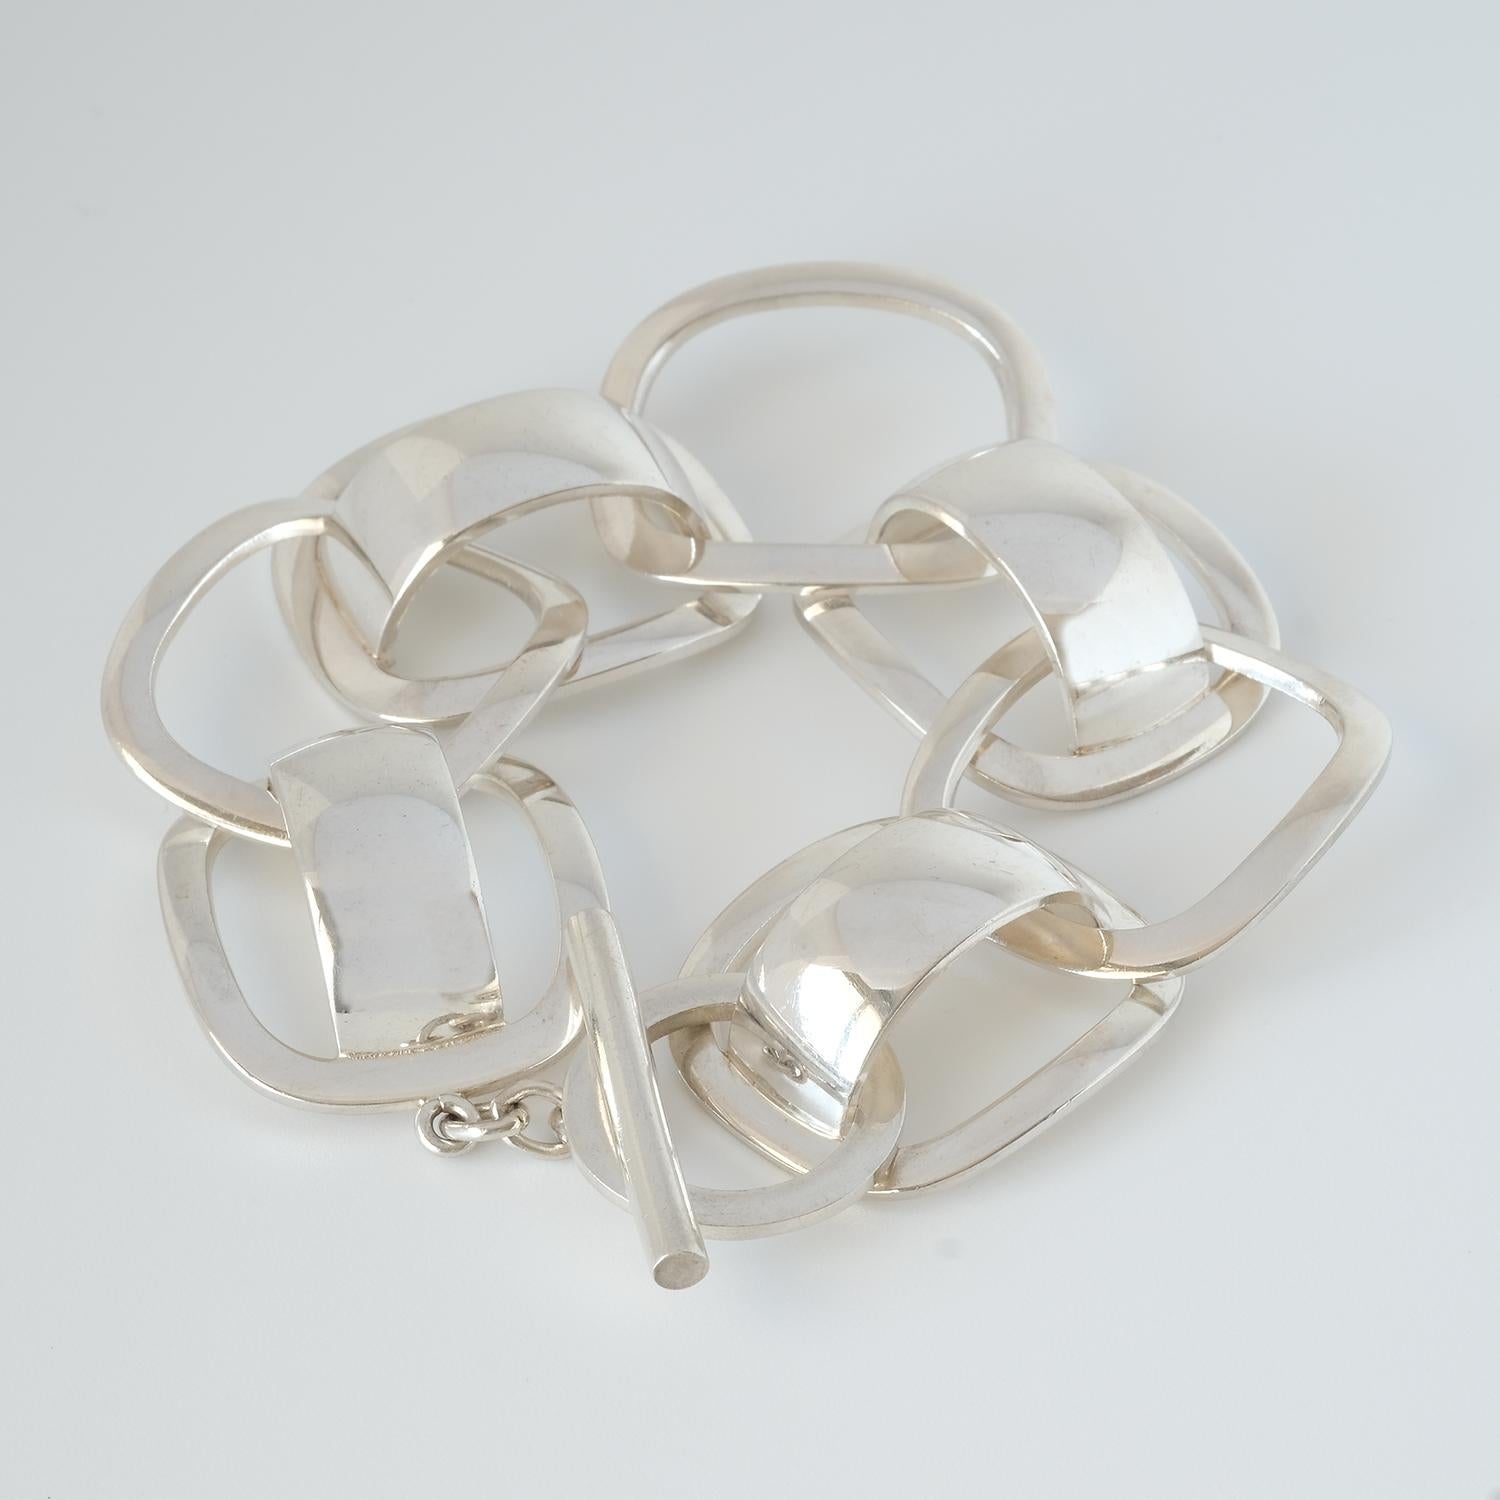 This sterling silver bracelet, with its pierced geometric links, drops down majestically on the wrist. The style of this bracelet is a good example of what is usually called modernist jewelry.

The bracelet is perfect for any casual or festive